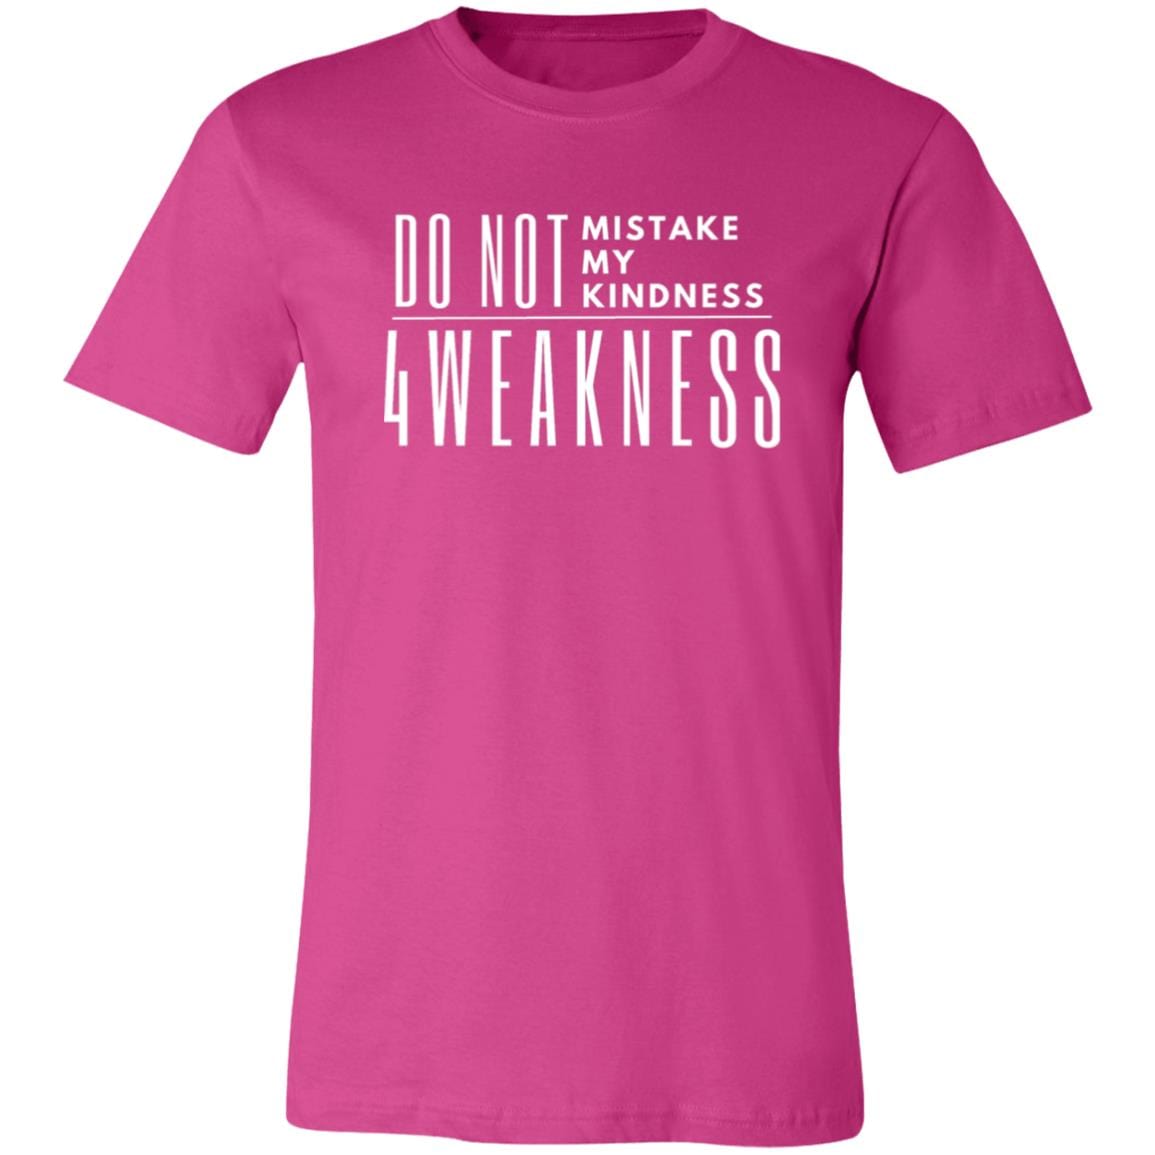 Don't Mistake My Kindness 4 weakness Comfiest Every Day TShirt